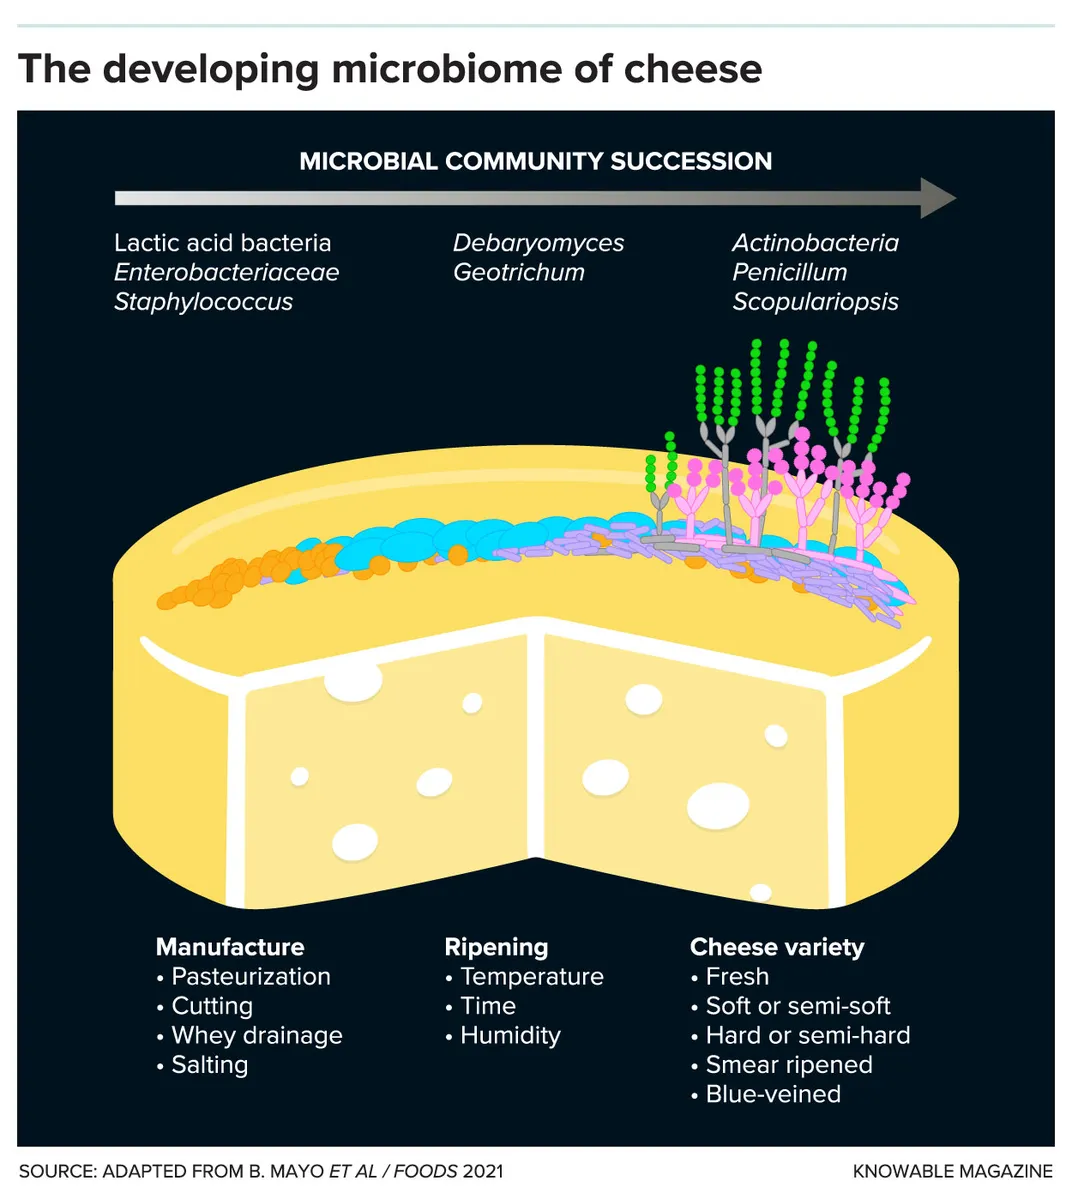 The Microbiome of Cheese